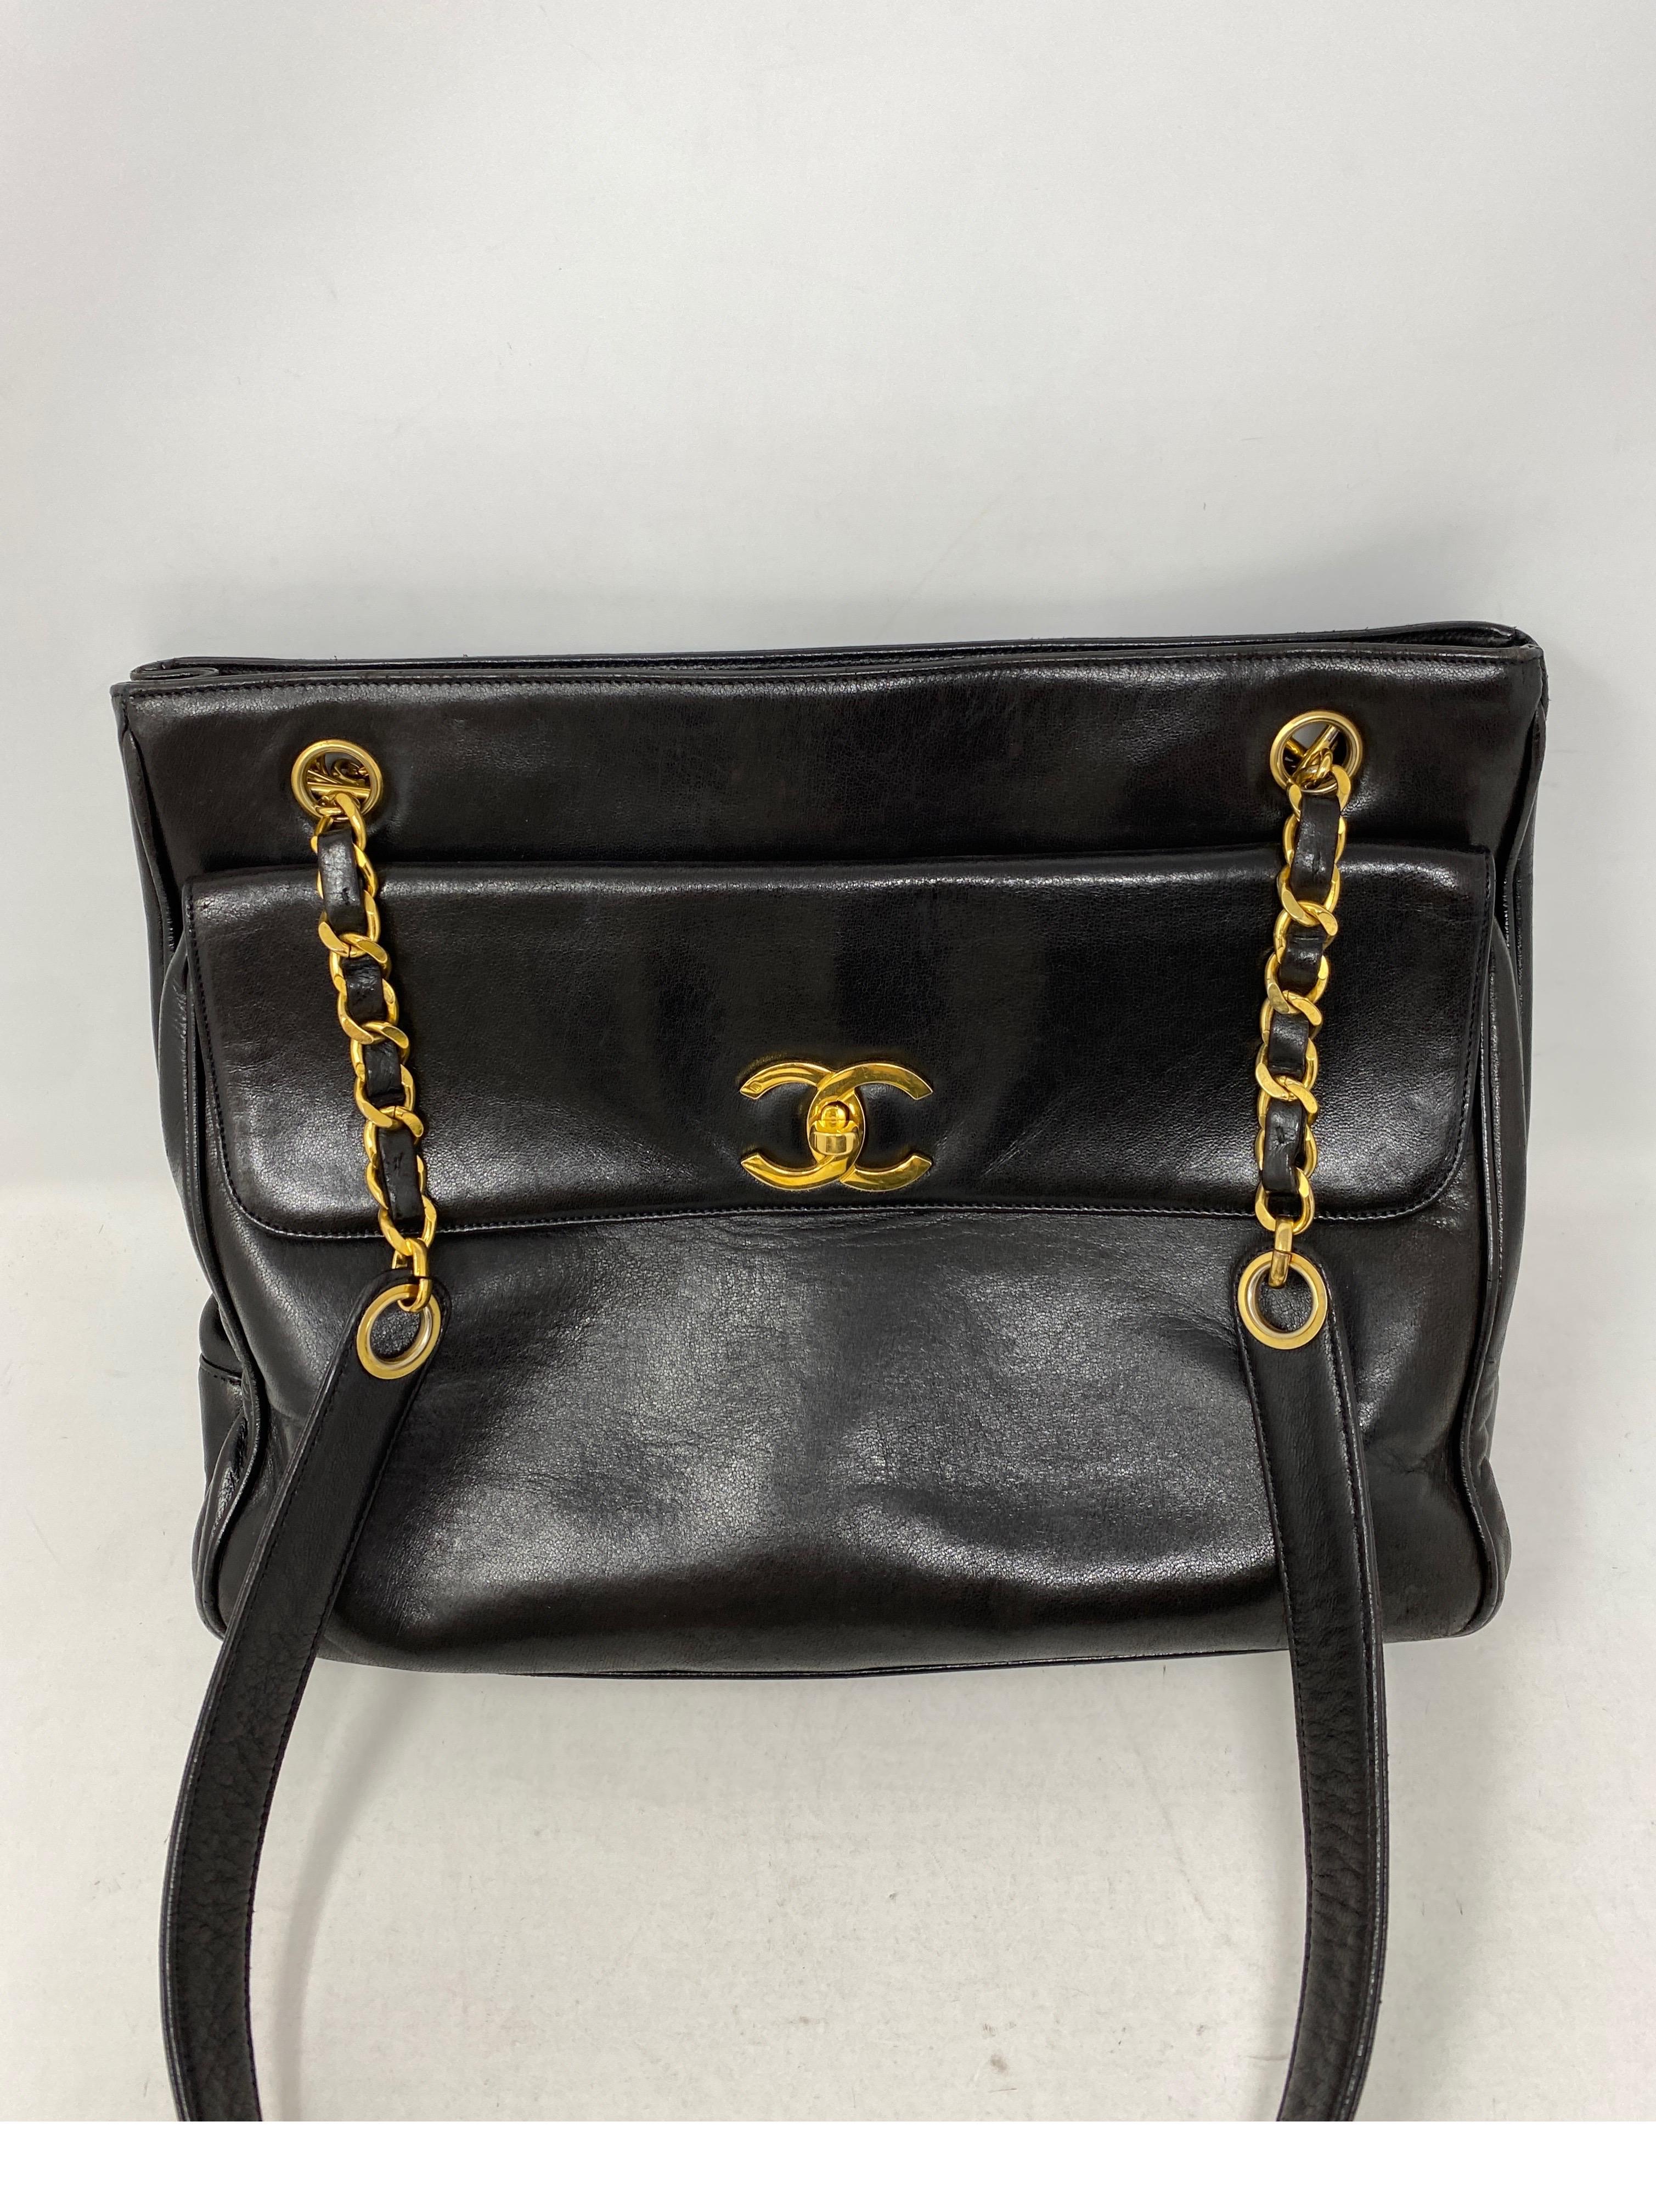 Chanel Vintage Black Leather Tote Bag. Soft lambskin leather bag with gold hardware. Good condition. 24 kt gold plating on hardware. From the 90's. Beautiful bag. Nice longer straps. Offered at a great price. Highly collectible vintage bag.